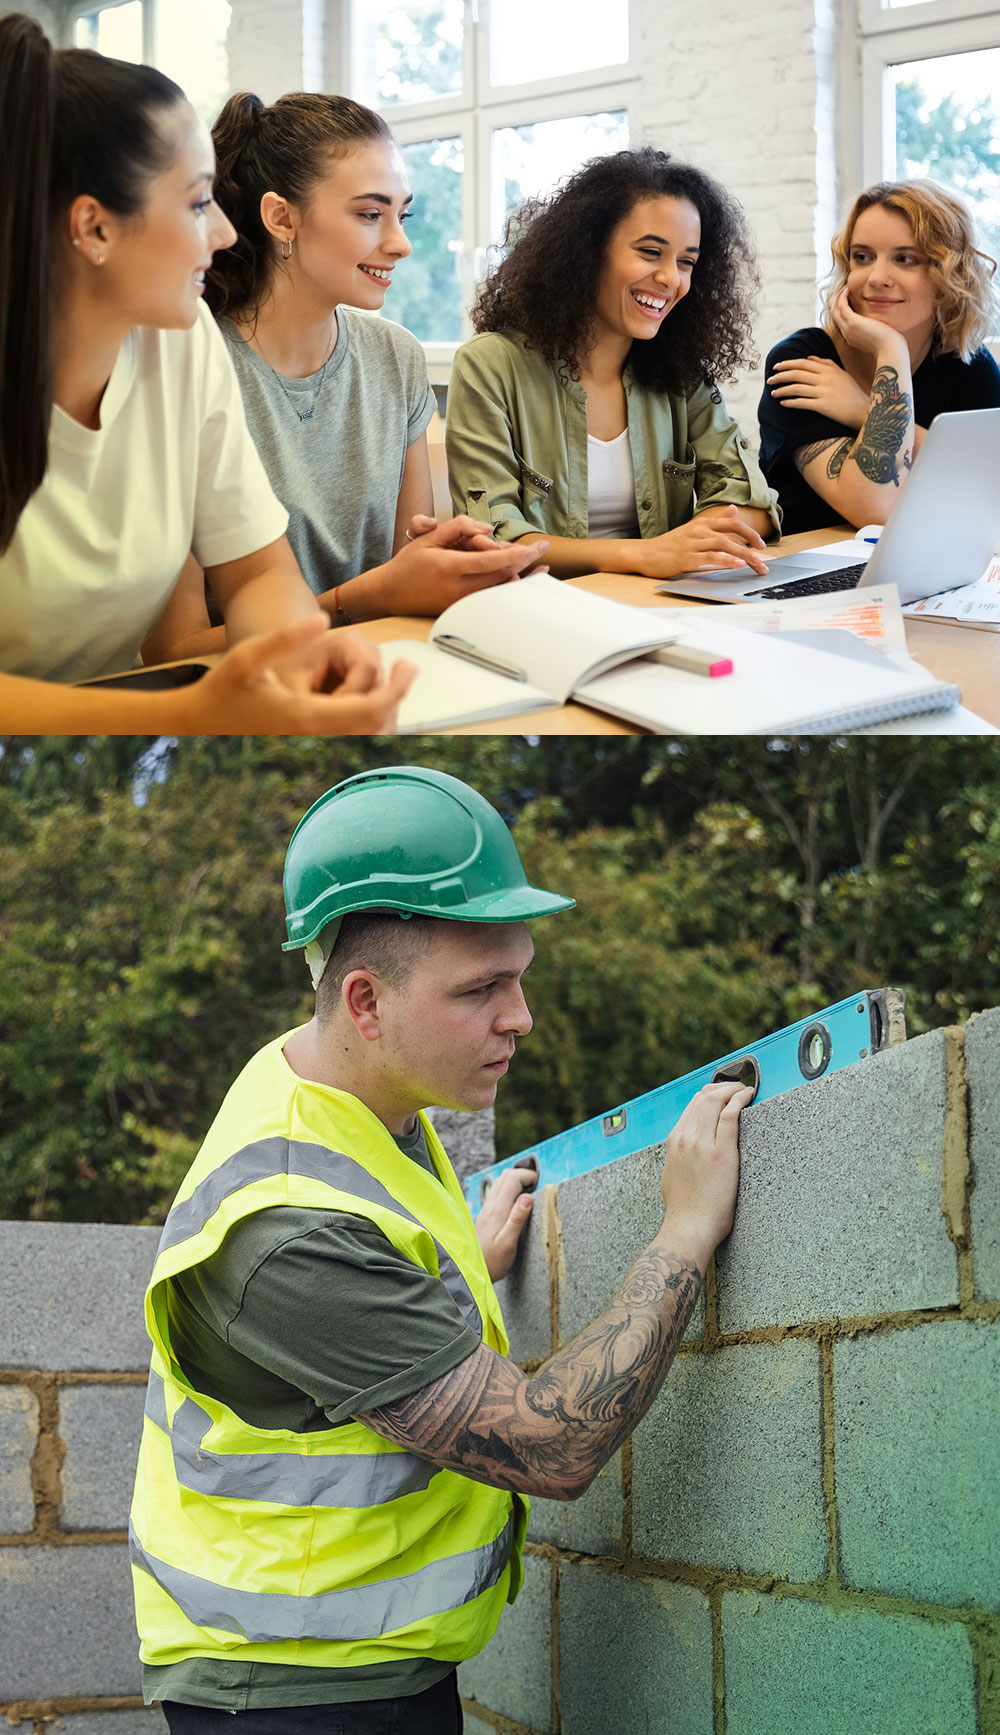 Students and building apprentice image